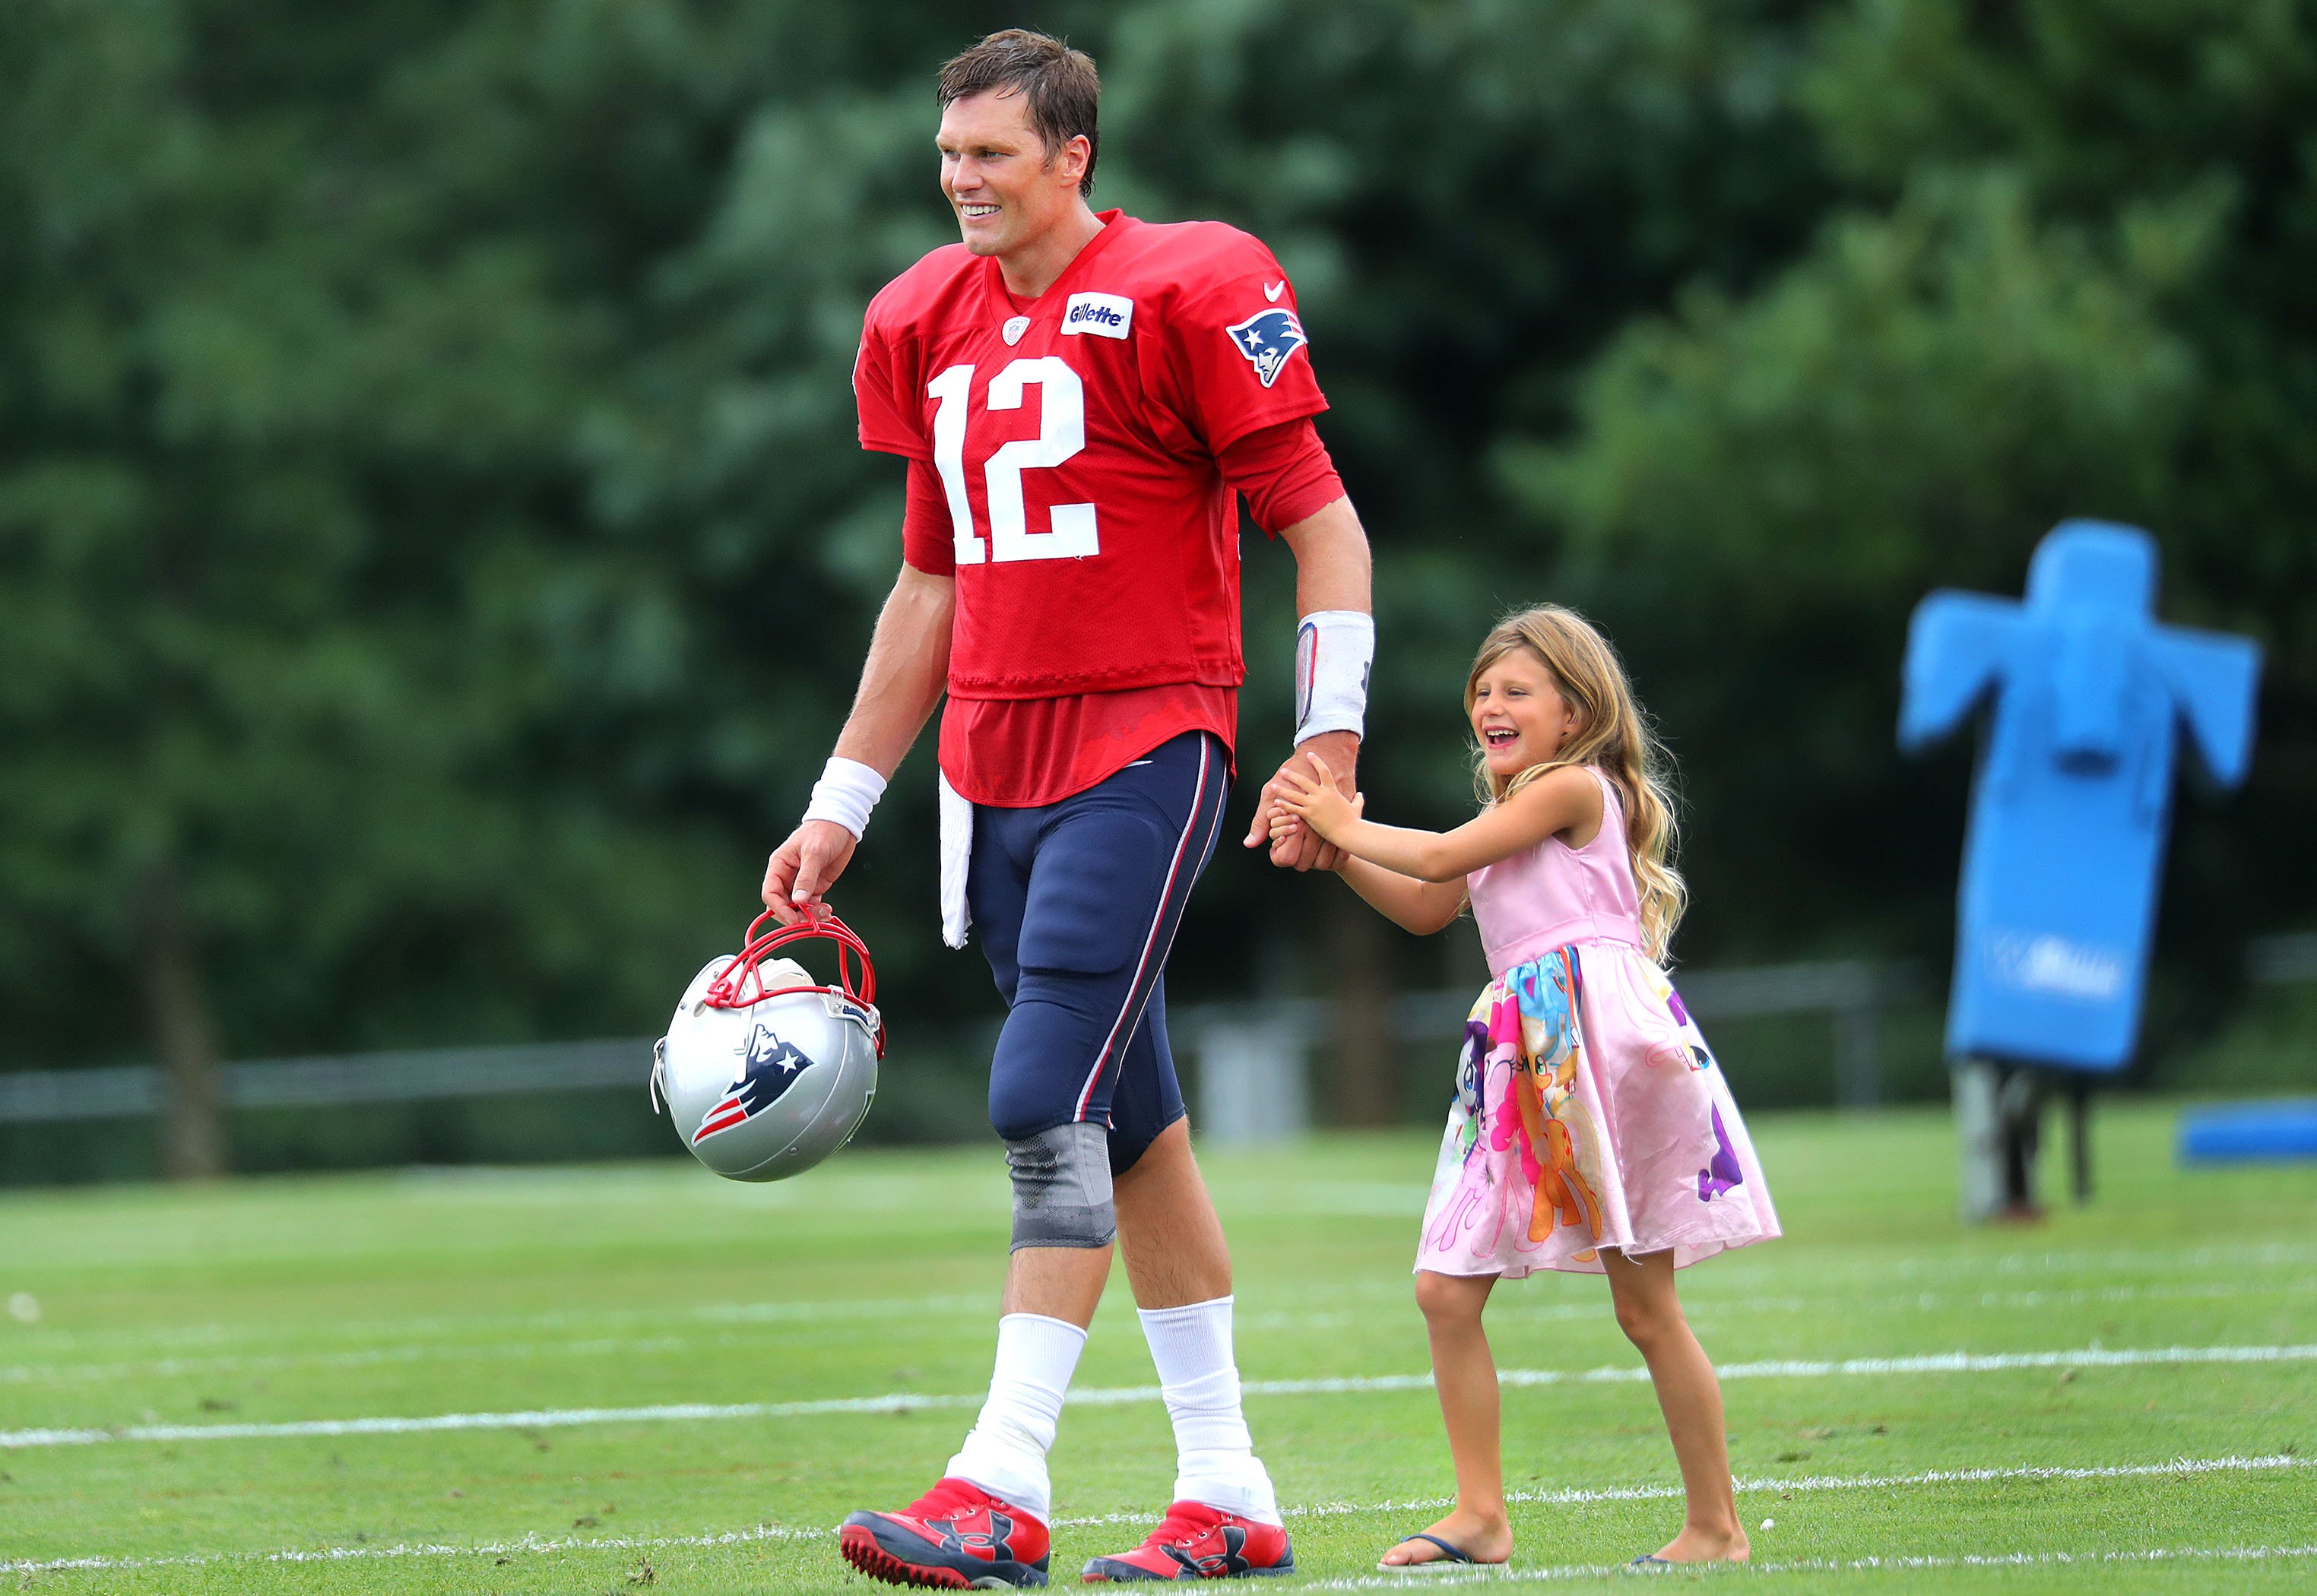 Tom Brady spends some time with his daughter, Vivian, 5, after Patriots training camp at the Gillette Stadium practice facility in Foxborough, MA, on August 1, 2018. | Source: Getty Images